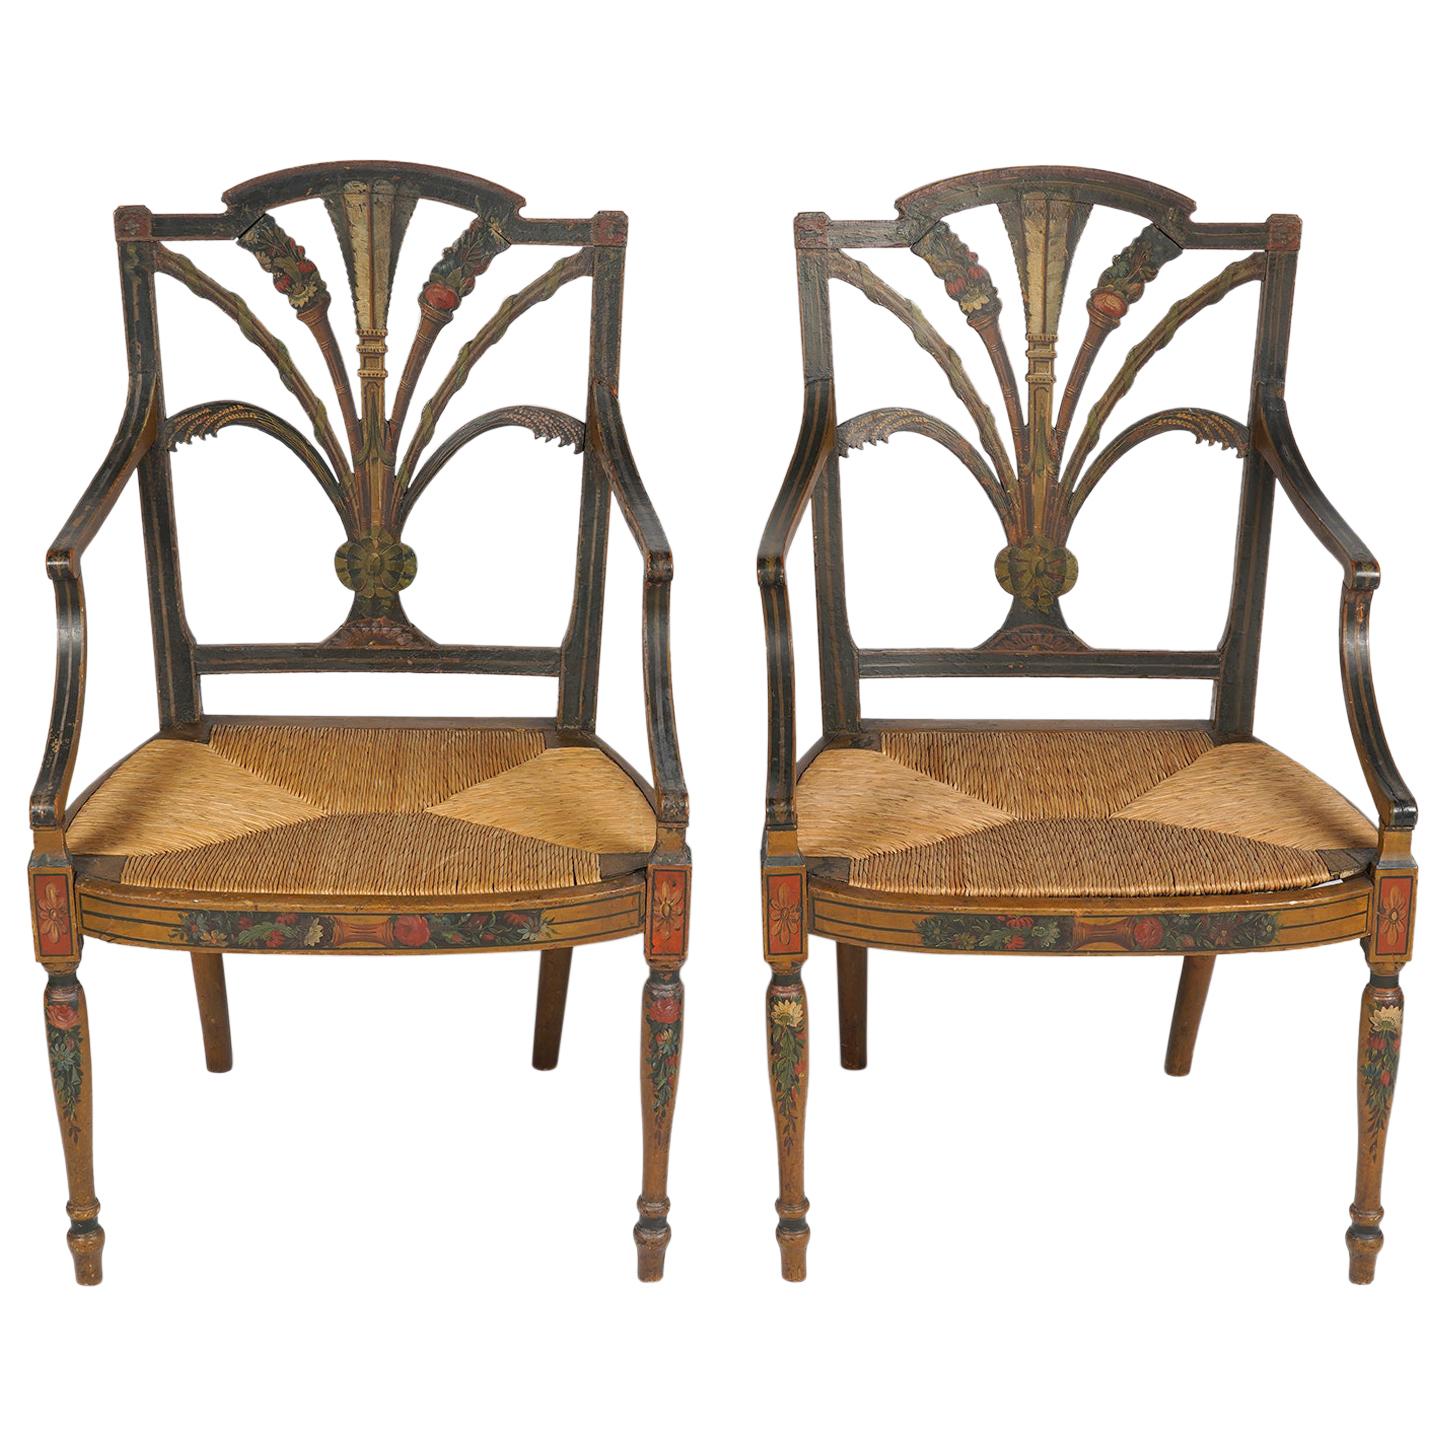 Pair of English Regency Carved and Paint Decorated Rush Seat Armchairs